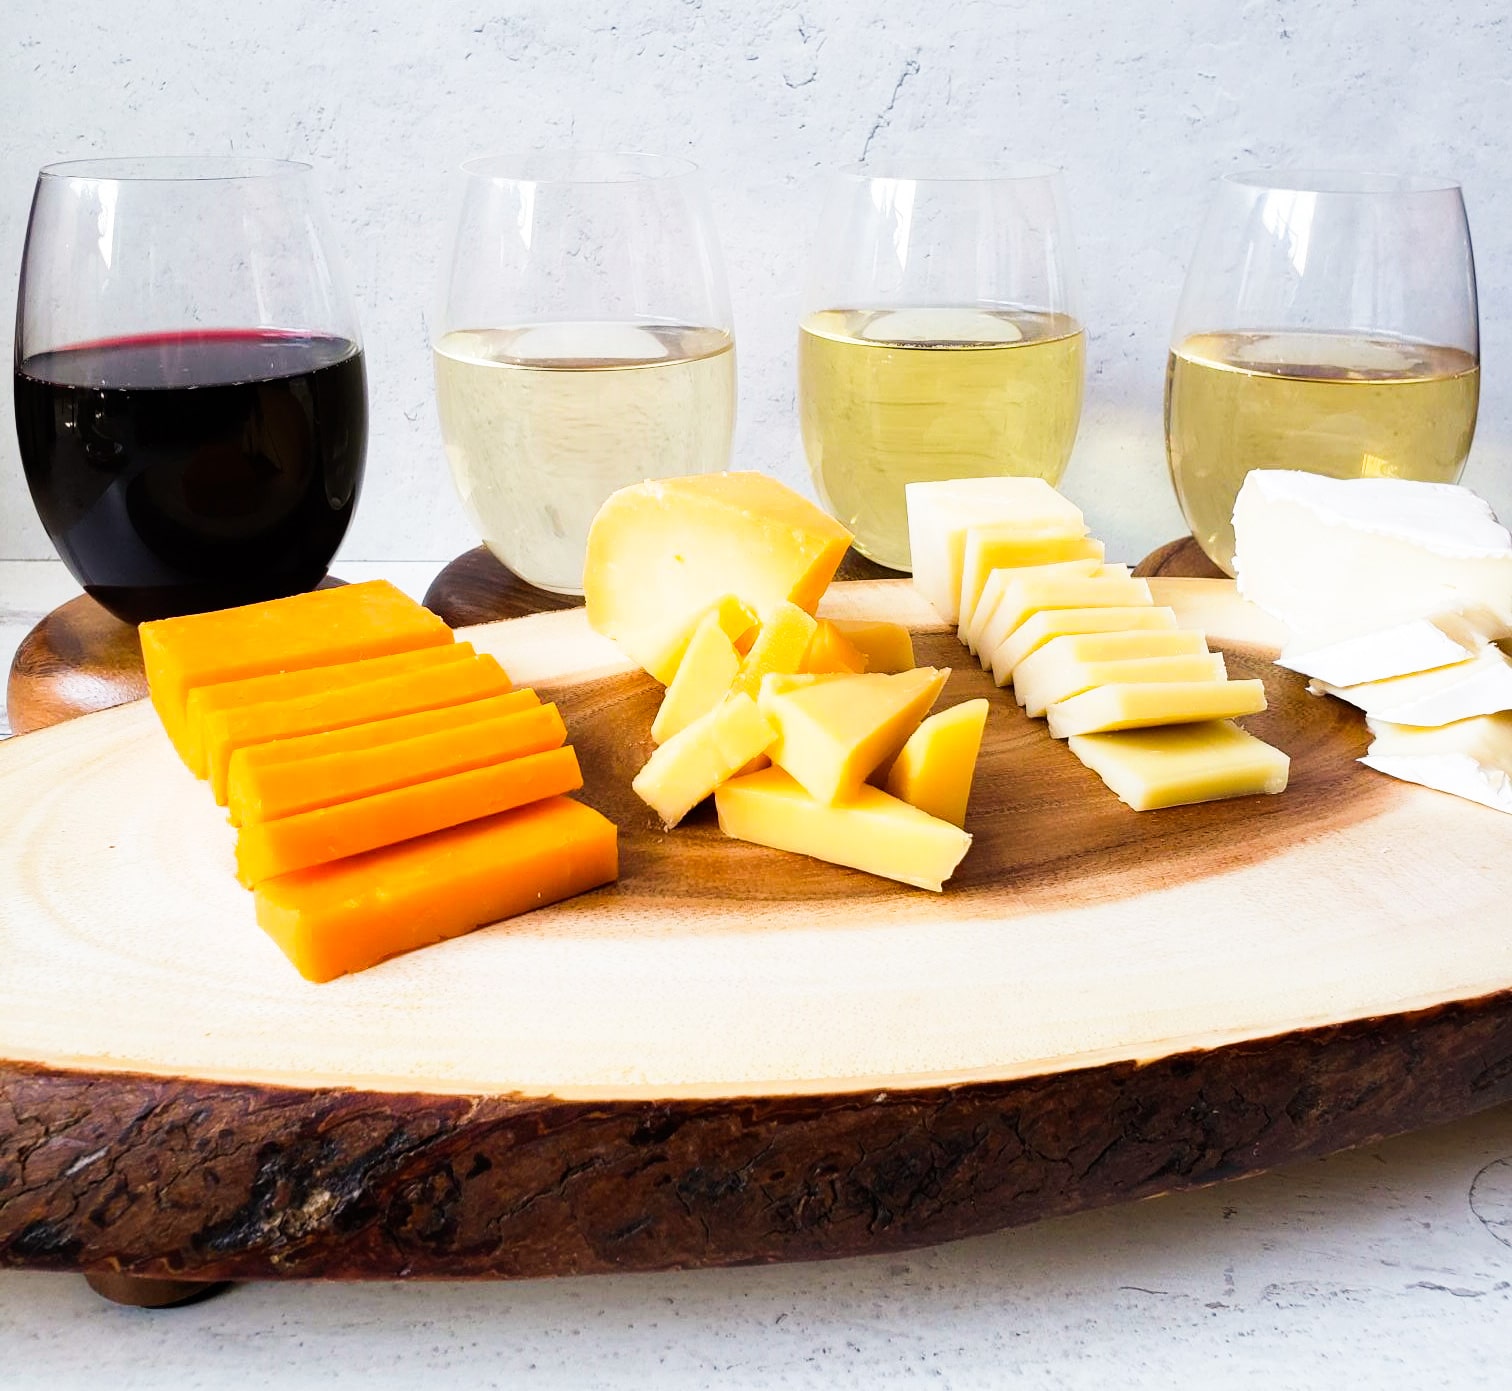 four glasses of wine - 3 white and 1 red are behind a wooden cheese board with 4 kinds of cheese